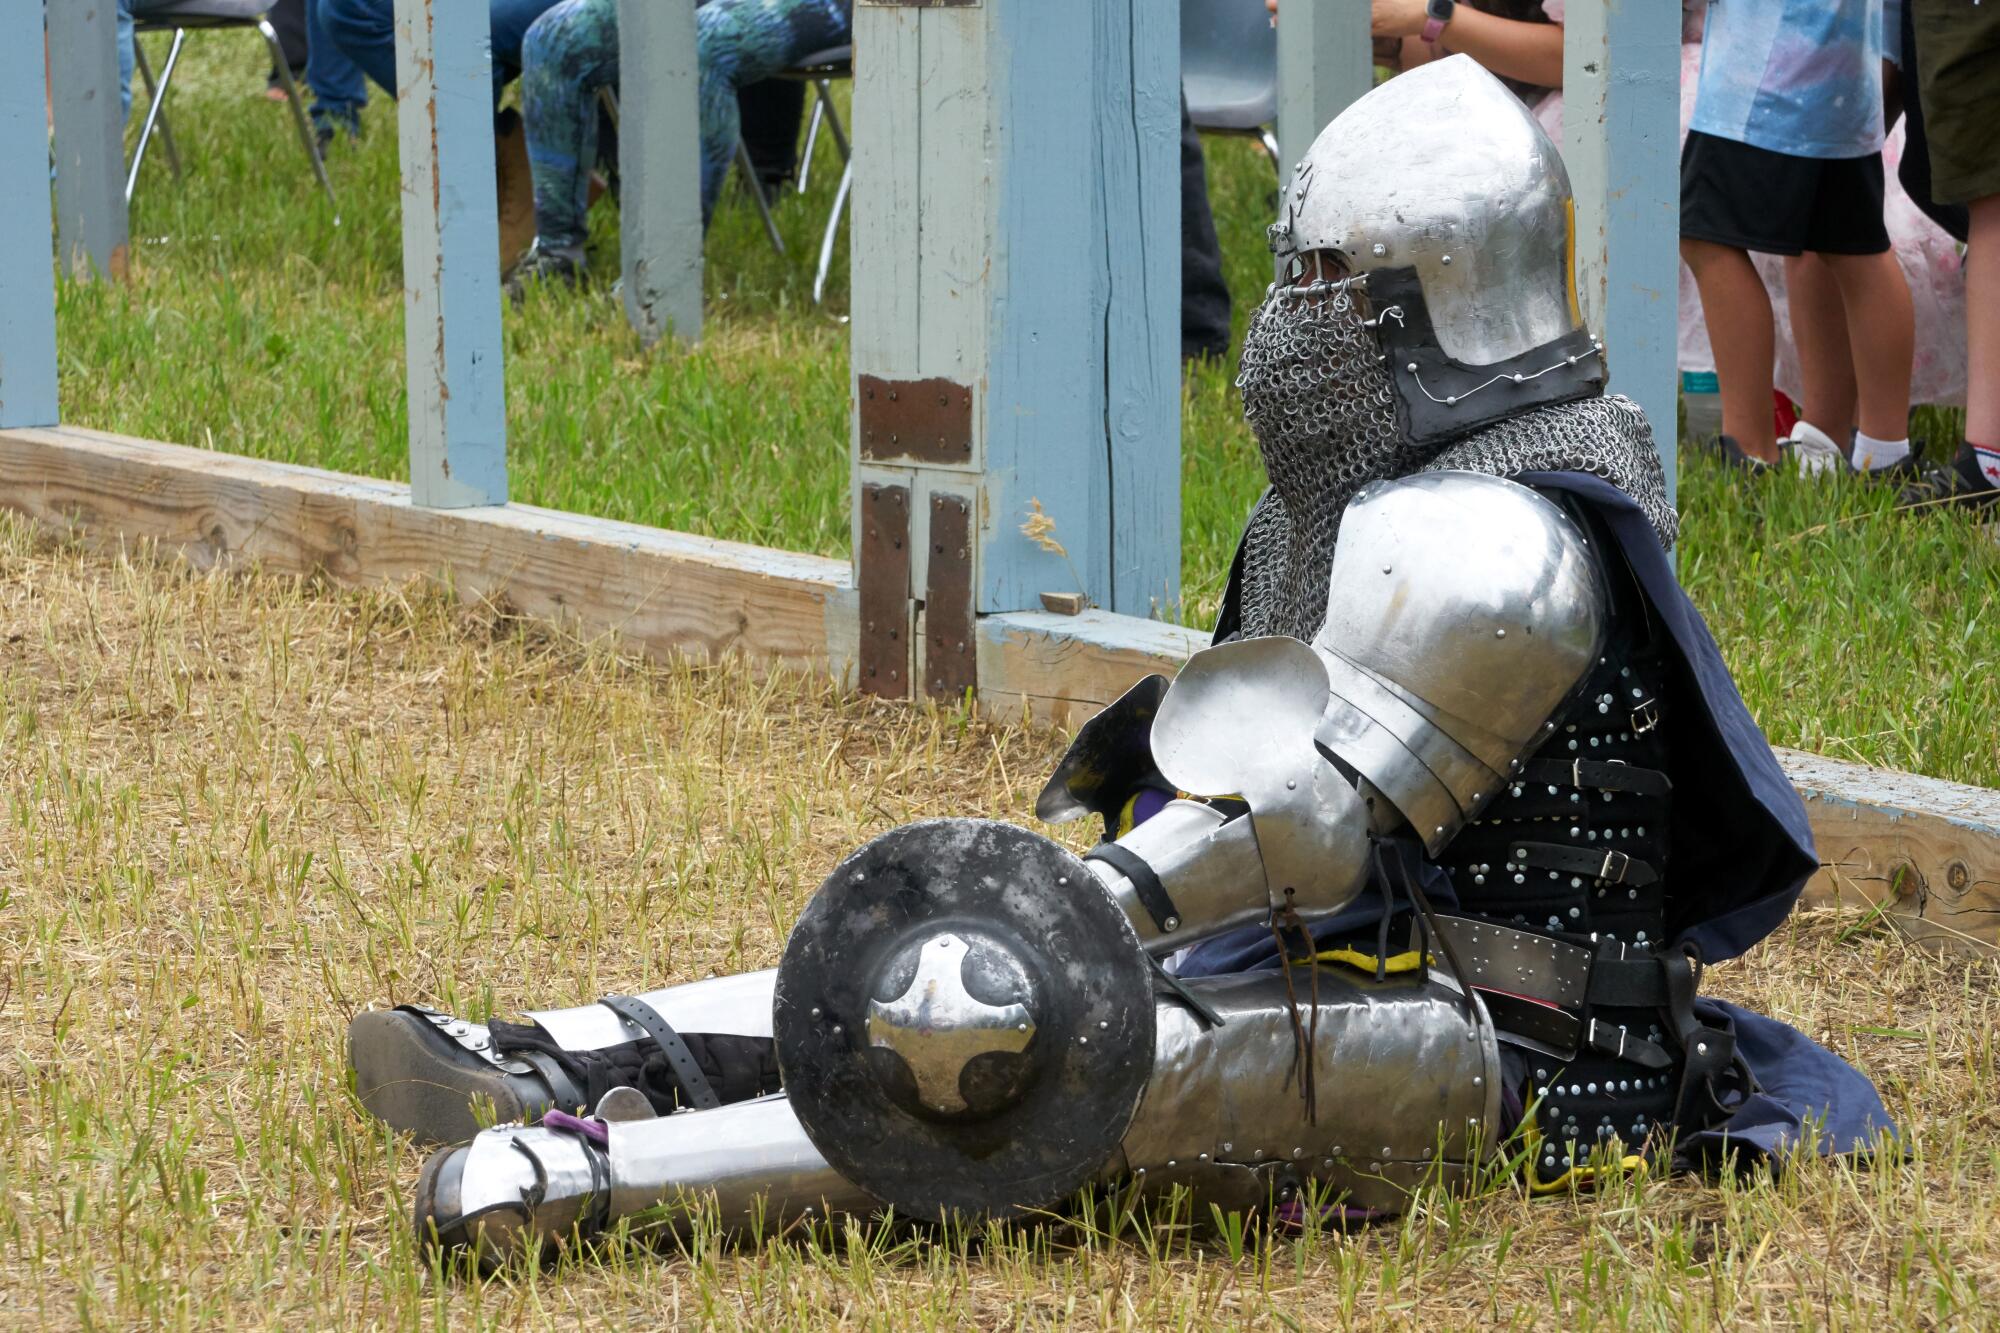 What's buhurt? Medieval combat sport with armor, swords, axes